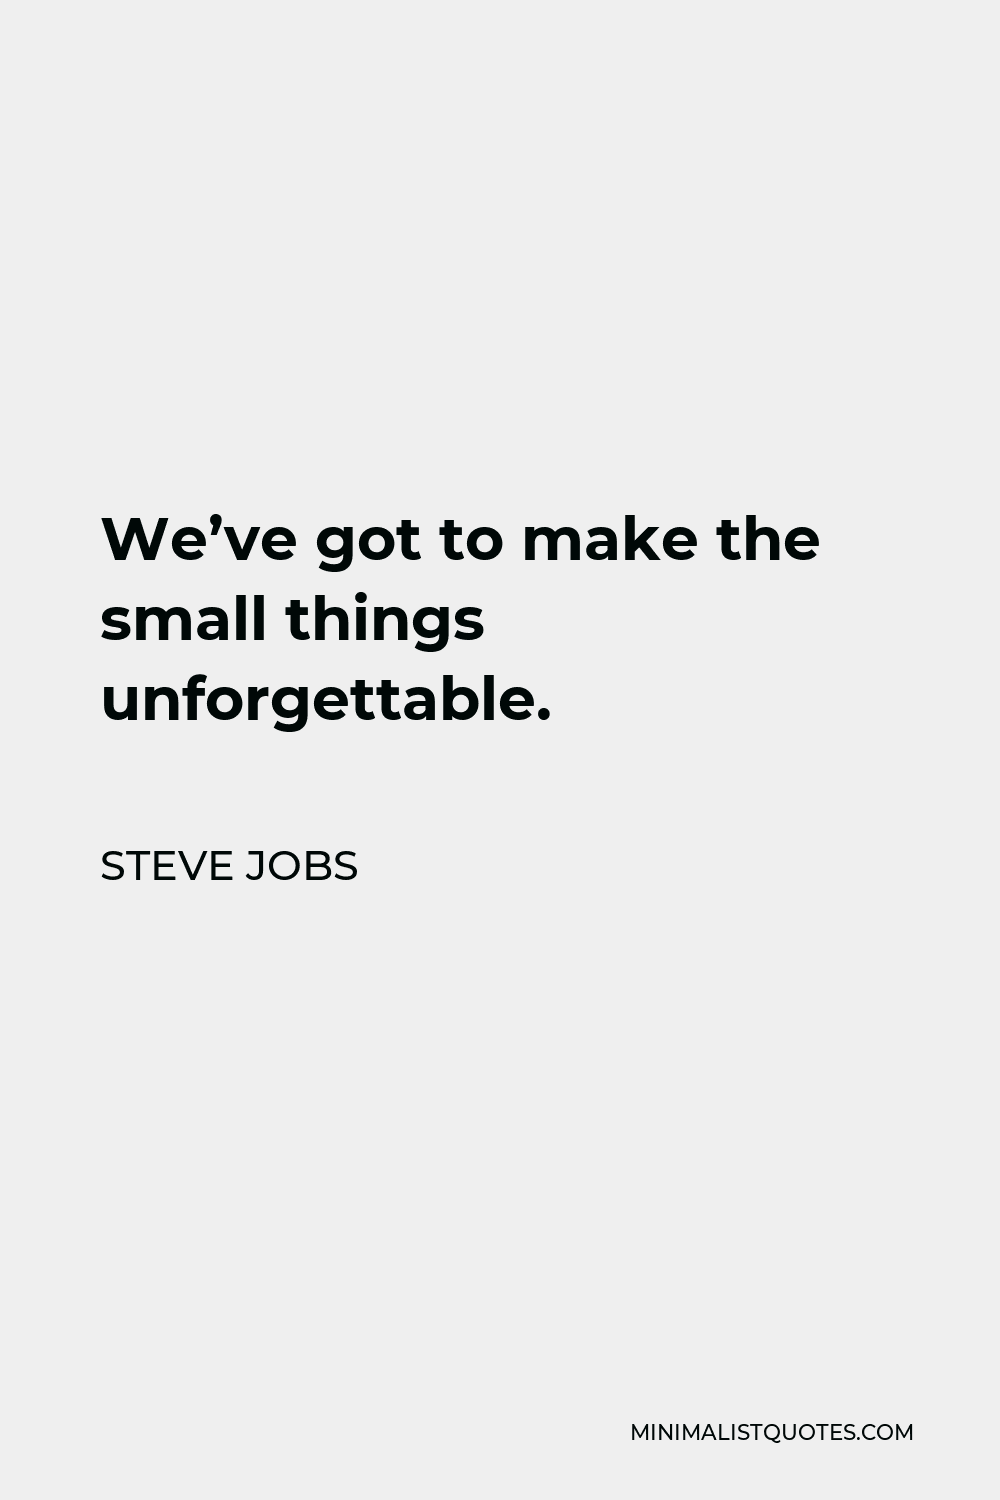 Steve Jobs Quote - We’ve got to make the small things unforgettable.